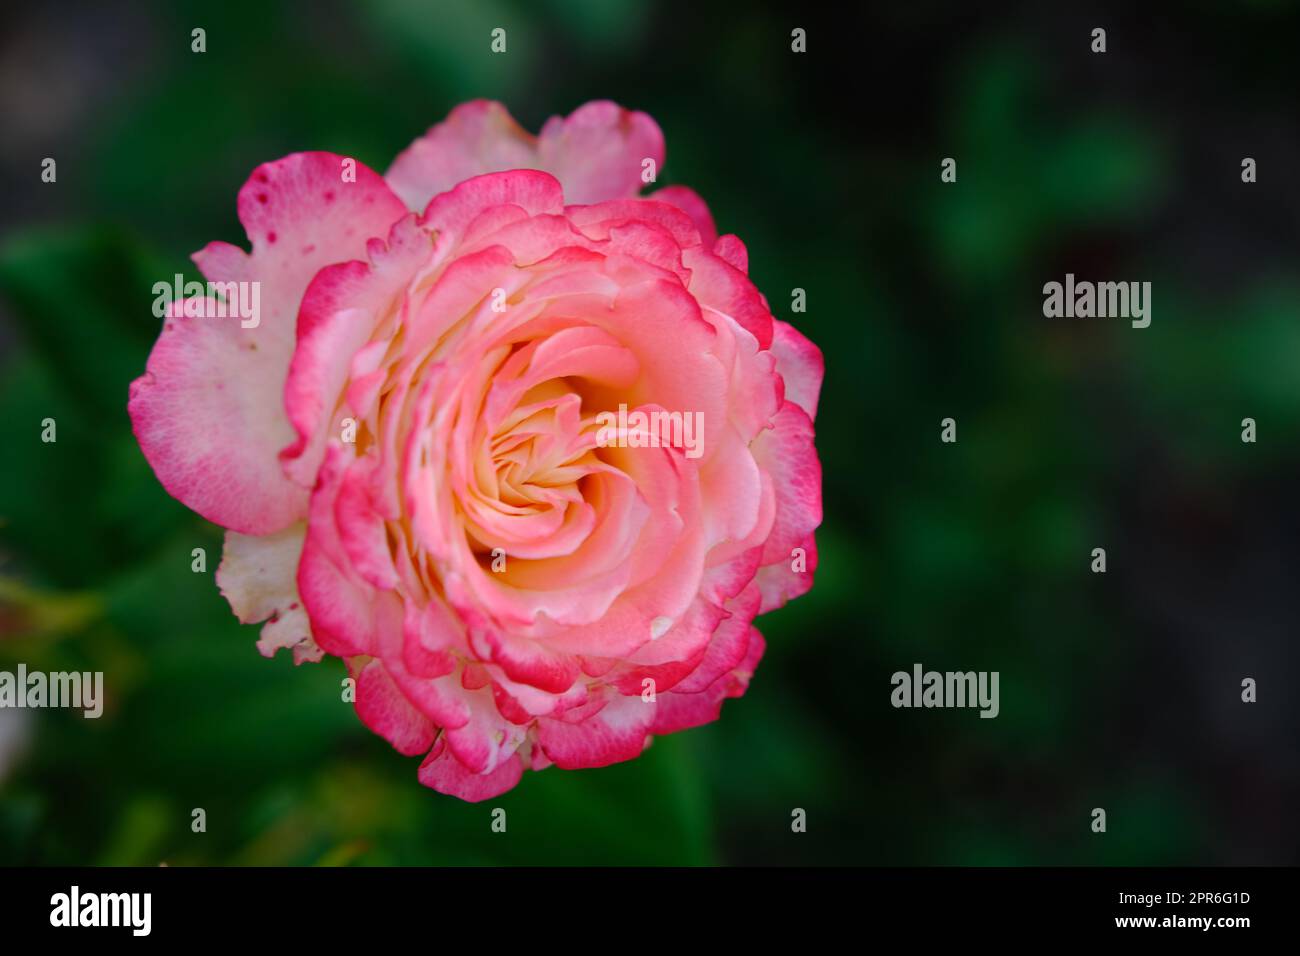 Soft pink roses on fresh green leaf background and bokeh blure with shallow depth of field. Soft focus. Stock Photo